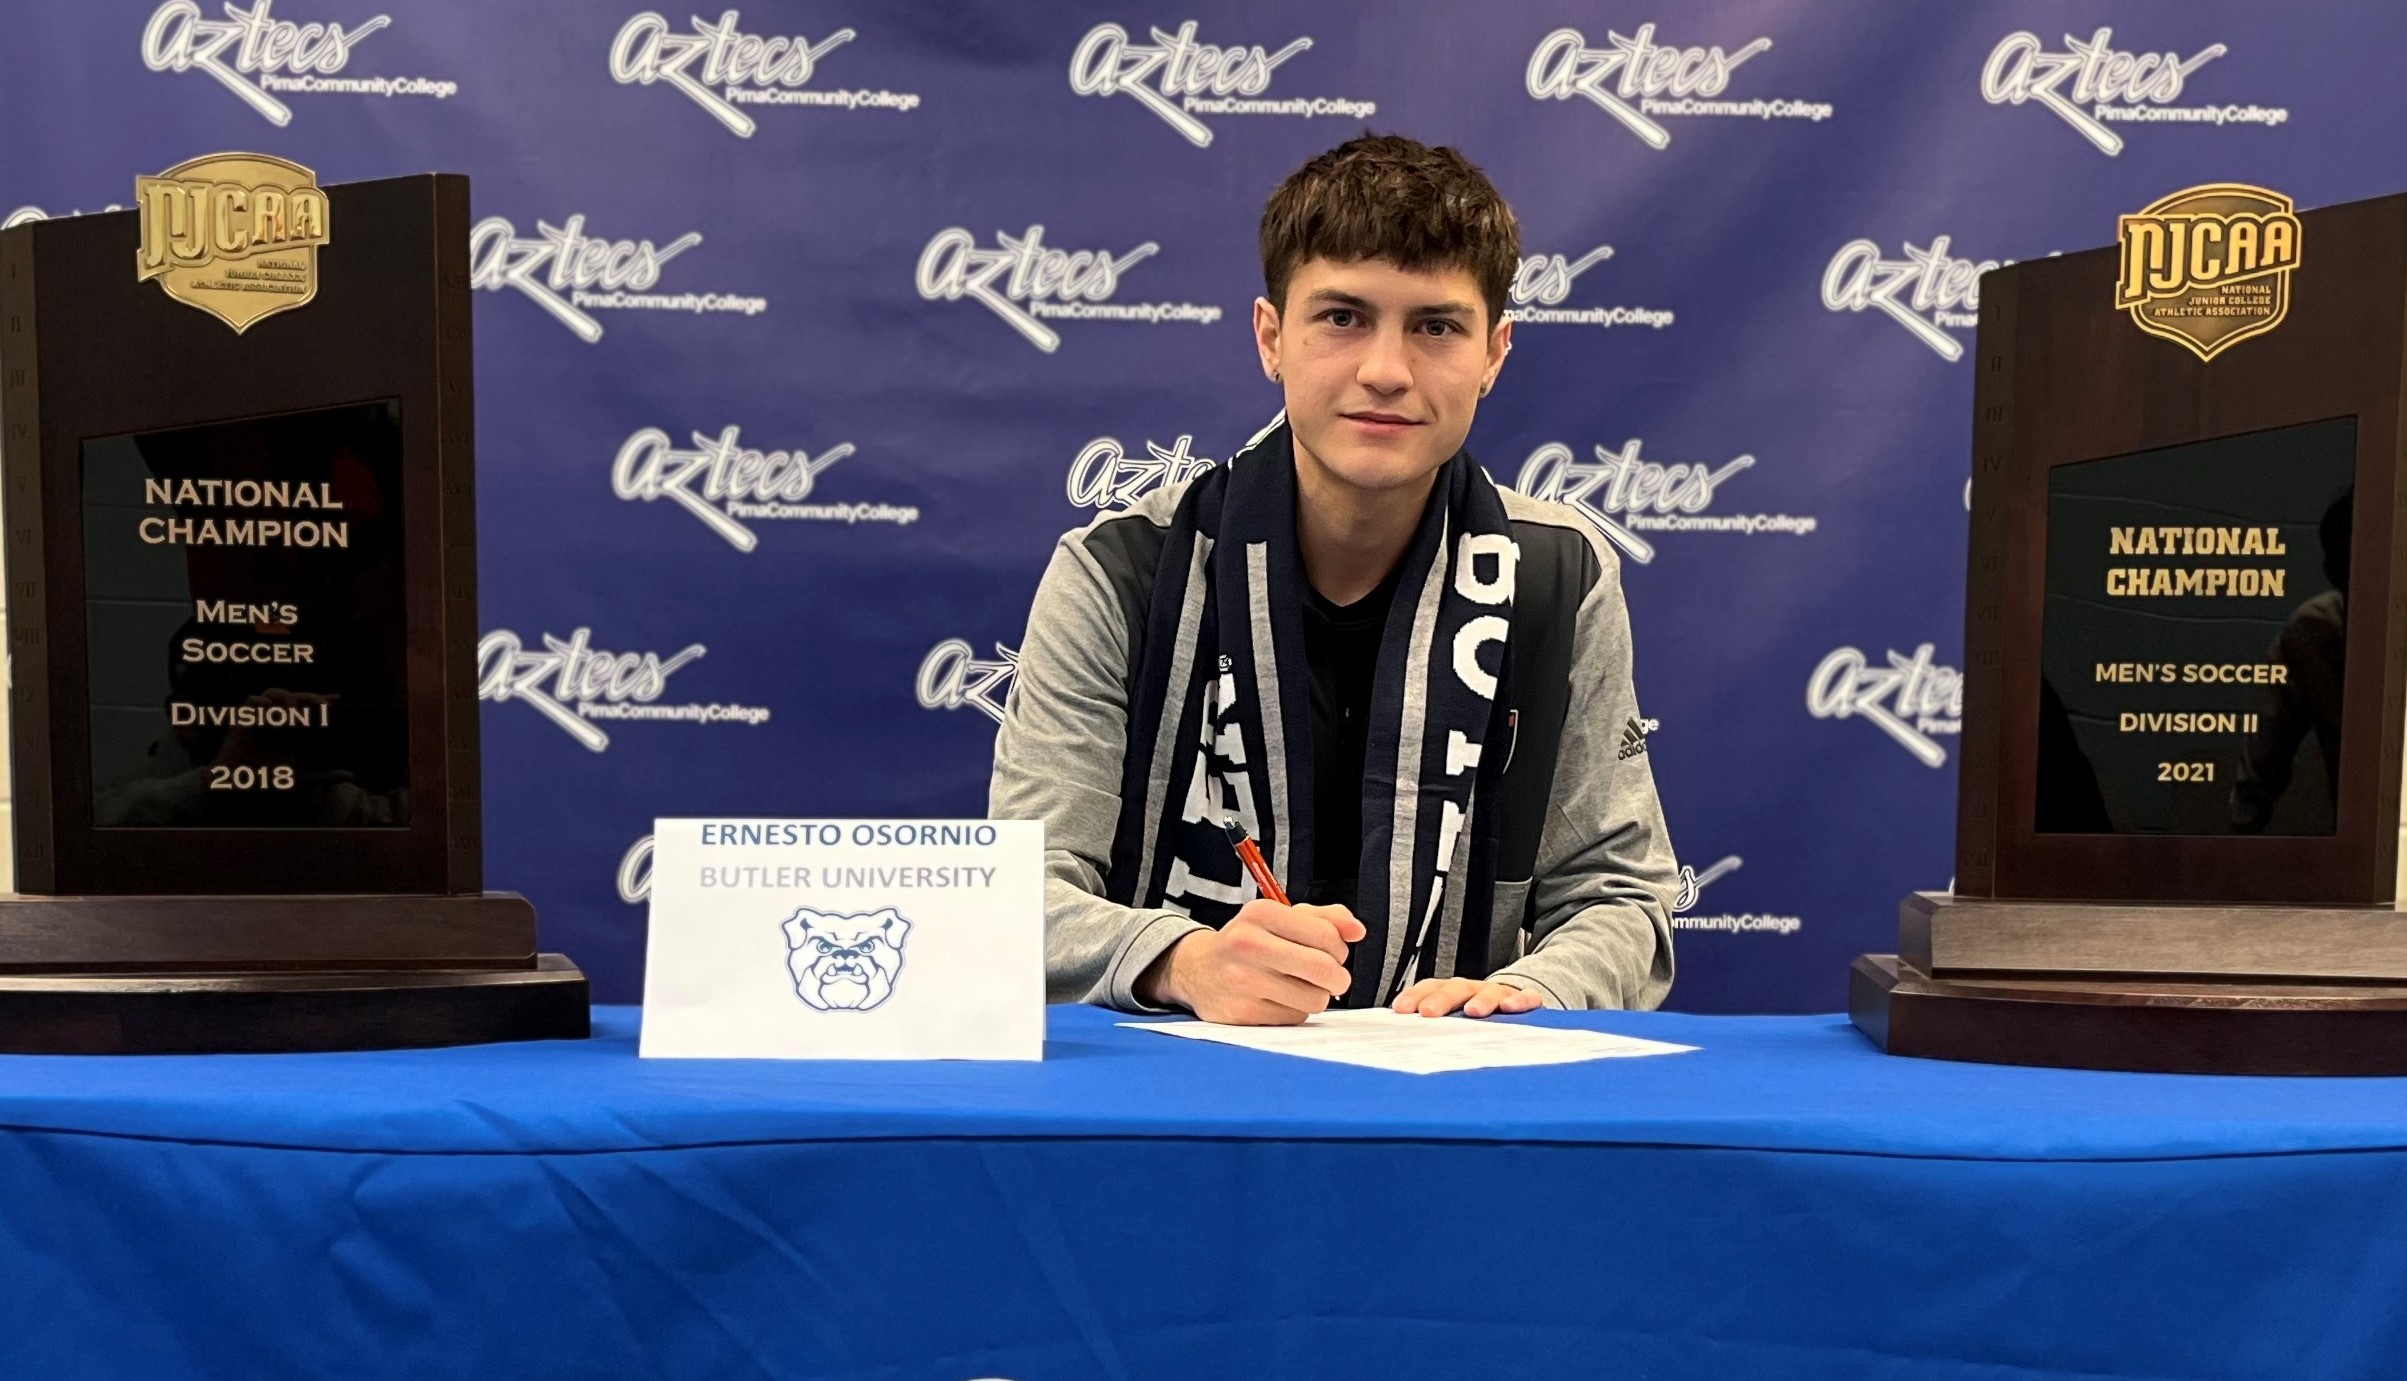 Sophomore forward/midfielder Ernesto Osornio (Ironwood HS) signed his letter of intent to continue his education and collegiate soccer career at Butler University, an NCAA Division I school in Indianapolis, Indiana. Osornio was a two-time NJCAA All-American and two-time All-ACCAC and All-Region I, Division II player at Pima (2022) and Phoenix College (2021). Photo by Raymond Suarez